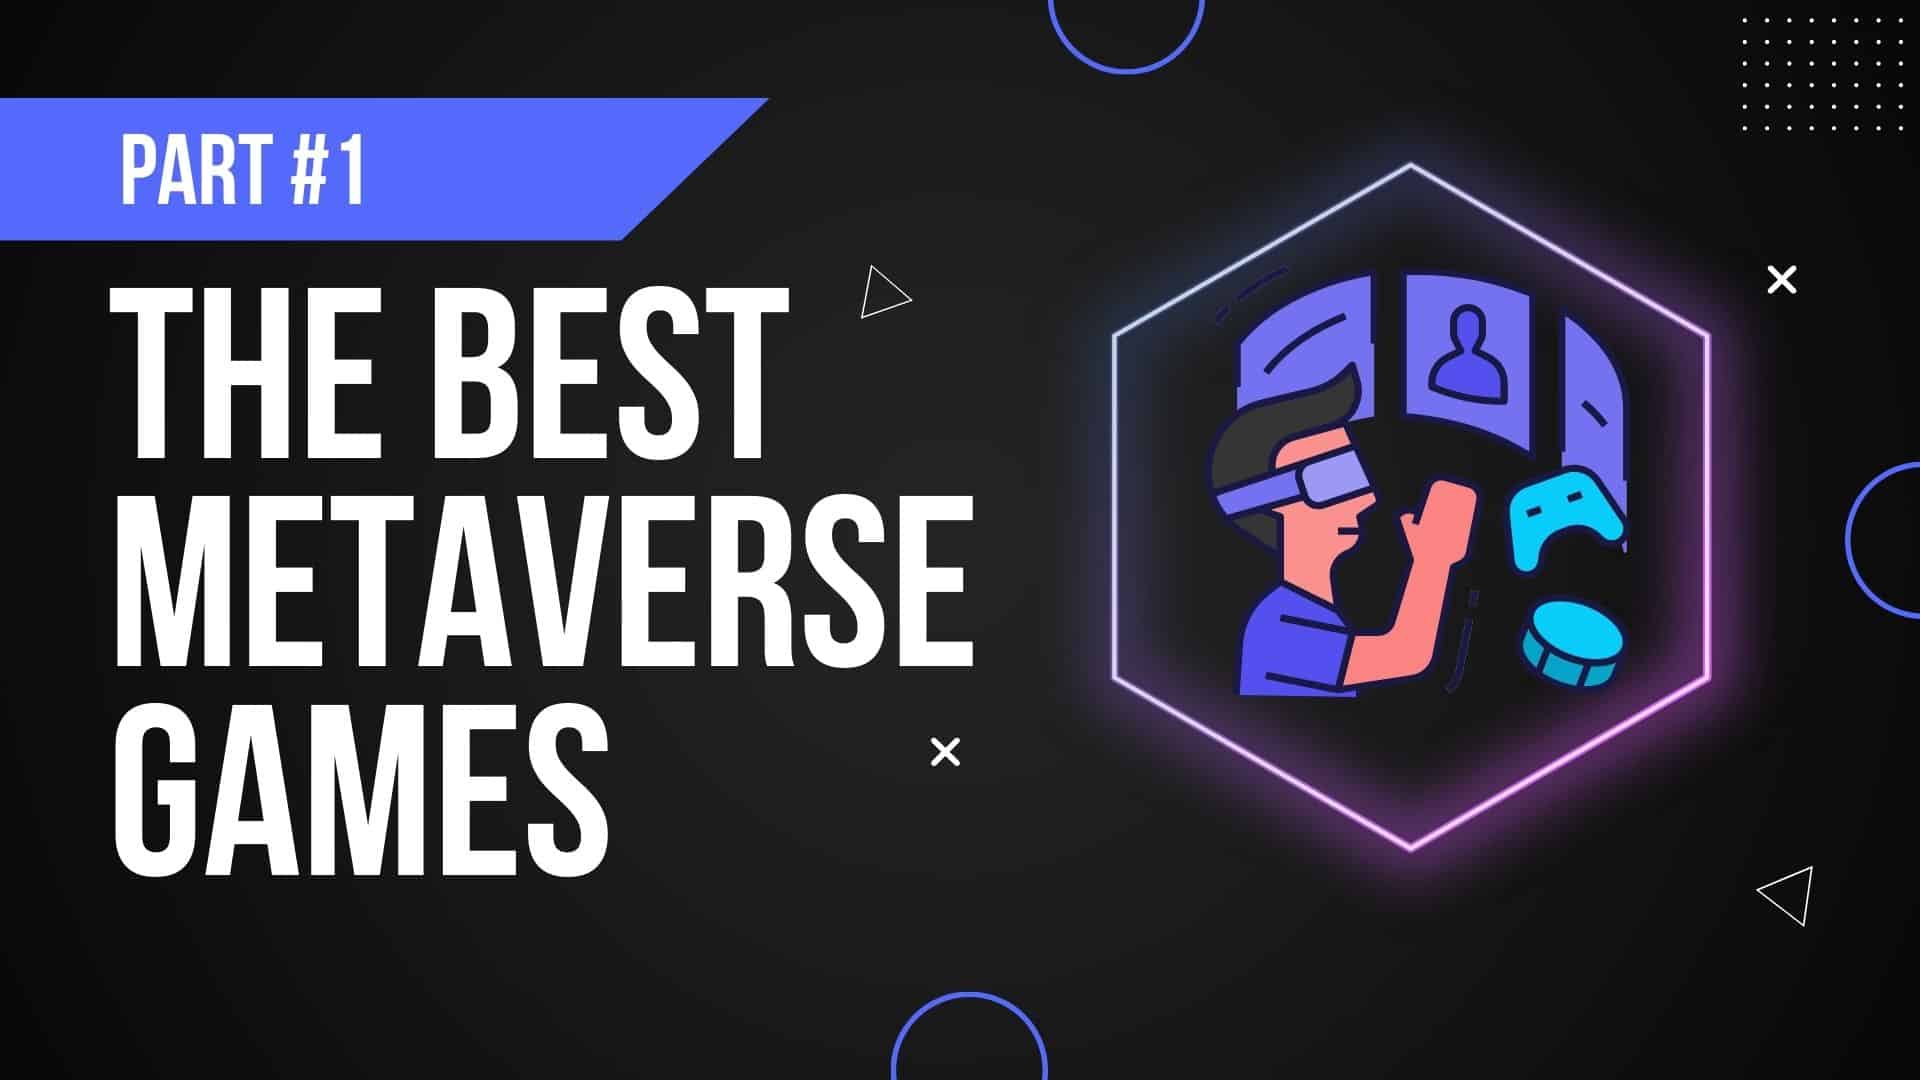 The Best Metaverse Games to Play in 2022